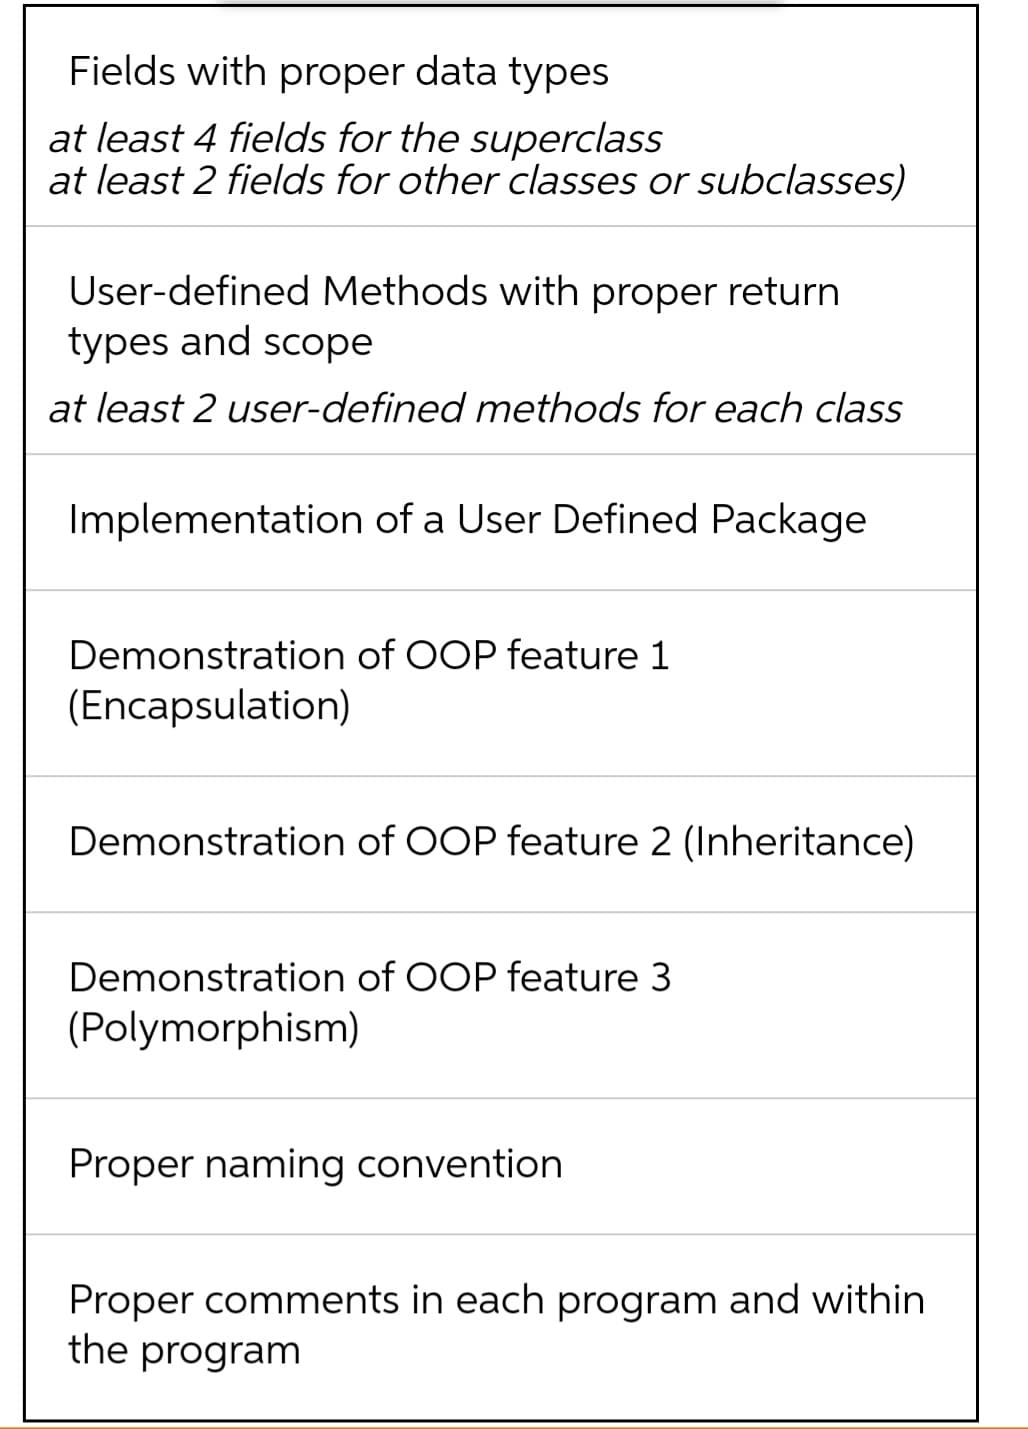 Fields with proper data types
at least 4 fields for the superclass
at least 2 fields for other classes or subclasses)
User-defined Methods with proper return
types and scope
at least 2 user-defined methods for each class
Implementation of a User Defined Package
Demonstration of OOP feature 1
(Encapsulation)
Demonstration of OOP feature 2 (Inheritance)
Demonstration of OOP feature 3
(Polymorphism)
Proper naming convention
Proper comments in each program and within
the program